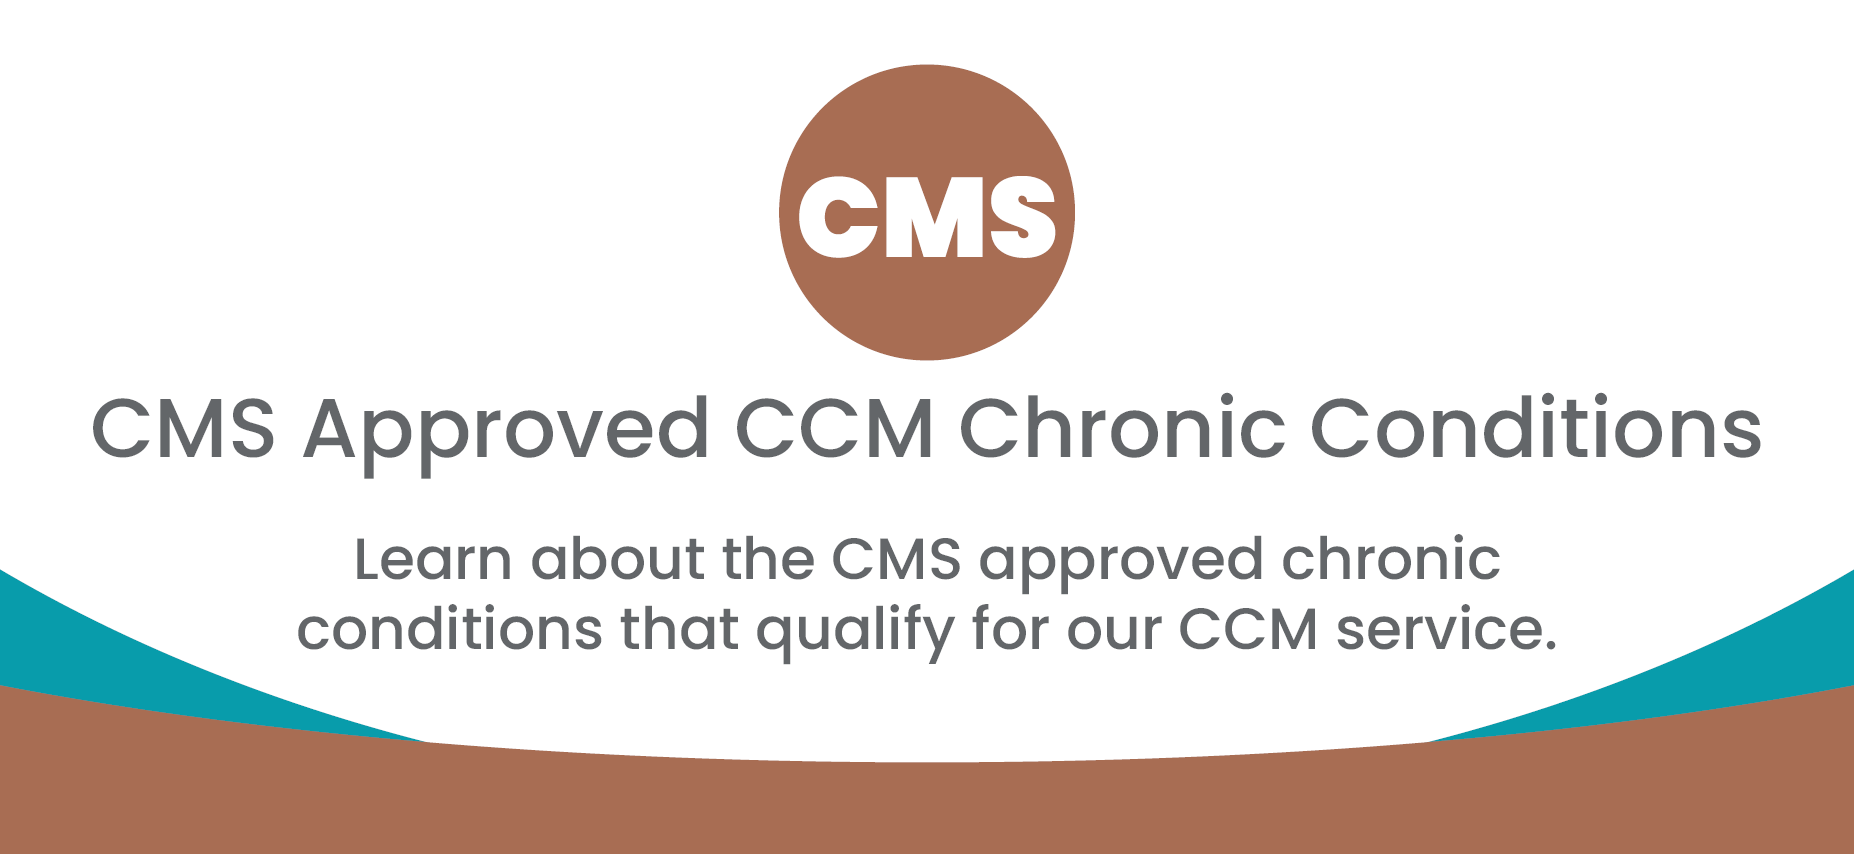 CMS Approved CCM Chronic Conditions 2022